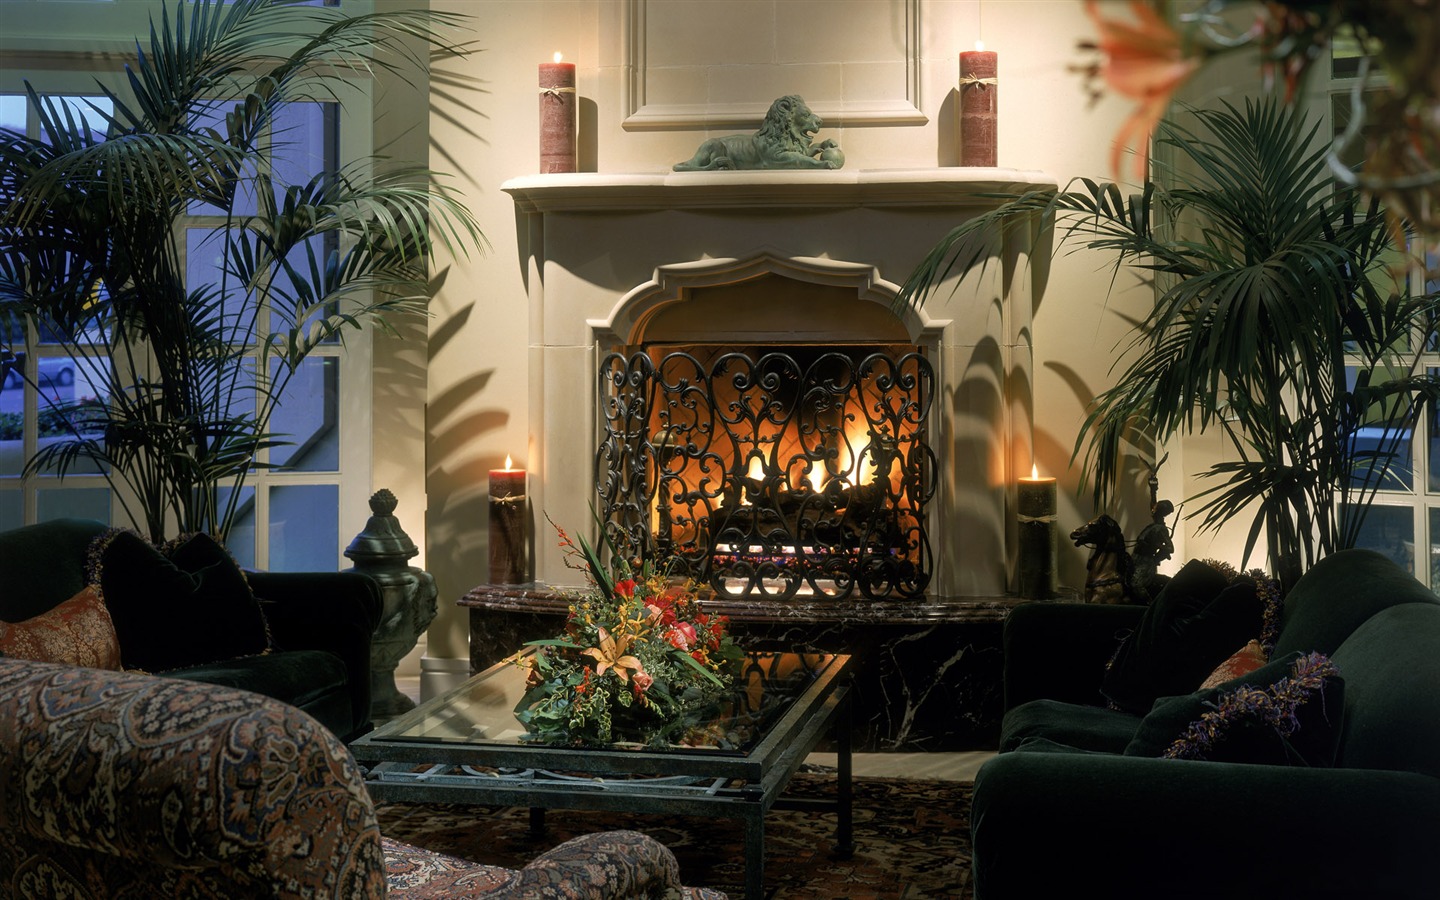 Western-style family fireplace wallpaper (2) #19 - 1440x900